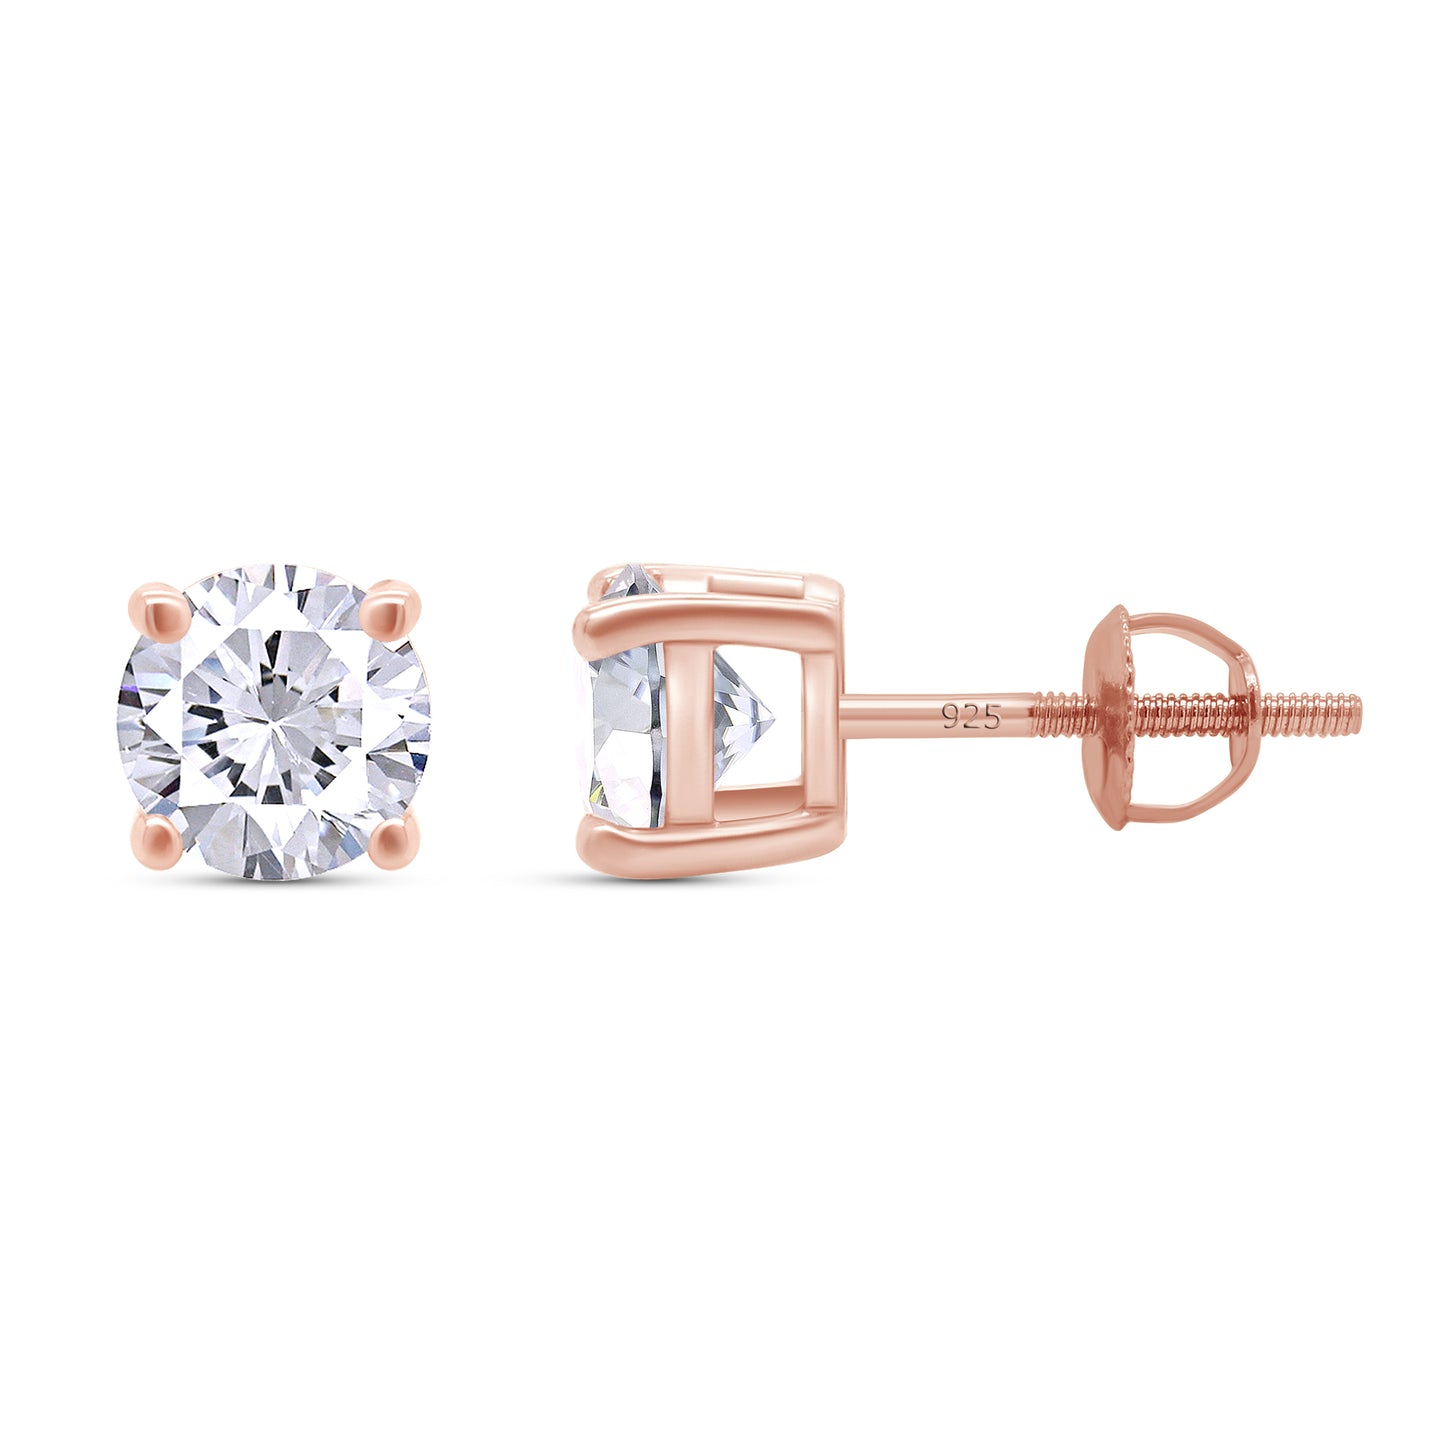 7.5MM Round Lab Created Moissanite Diamond Solitaire Pendant & Stud Earrings Jewelry Set In 925 Sterling Silver